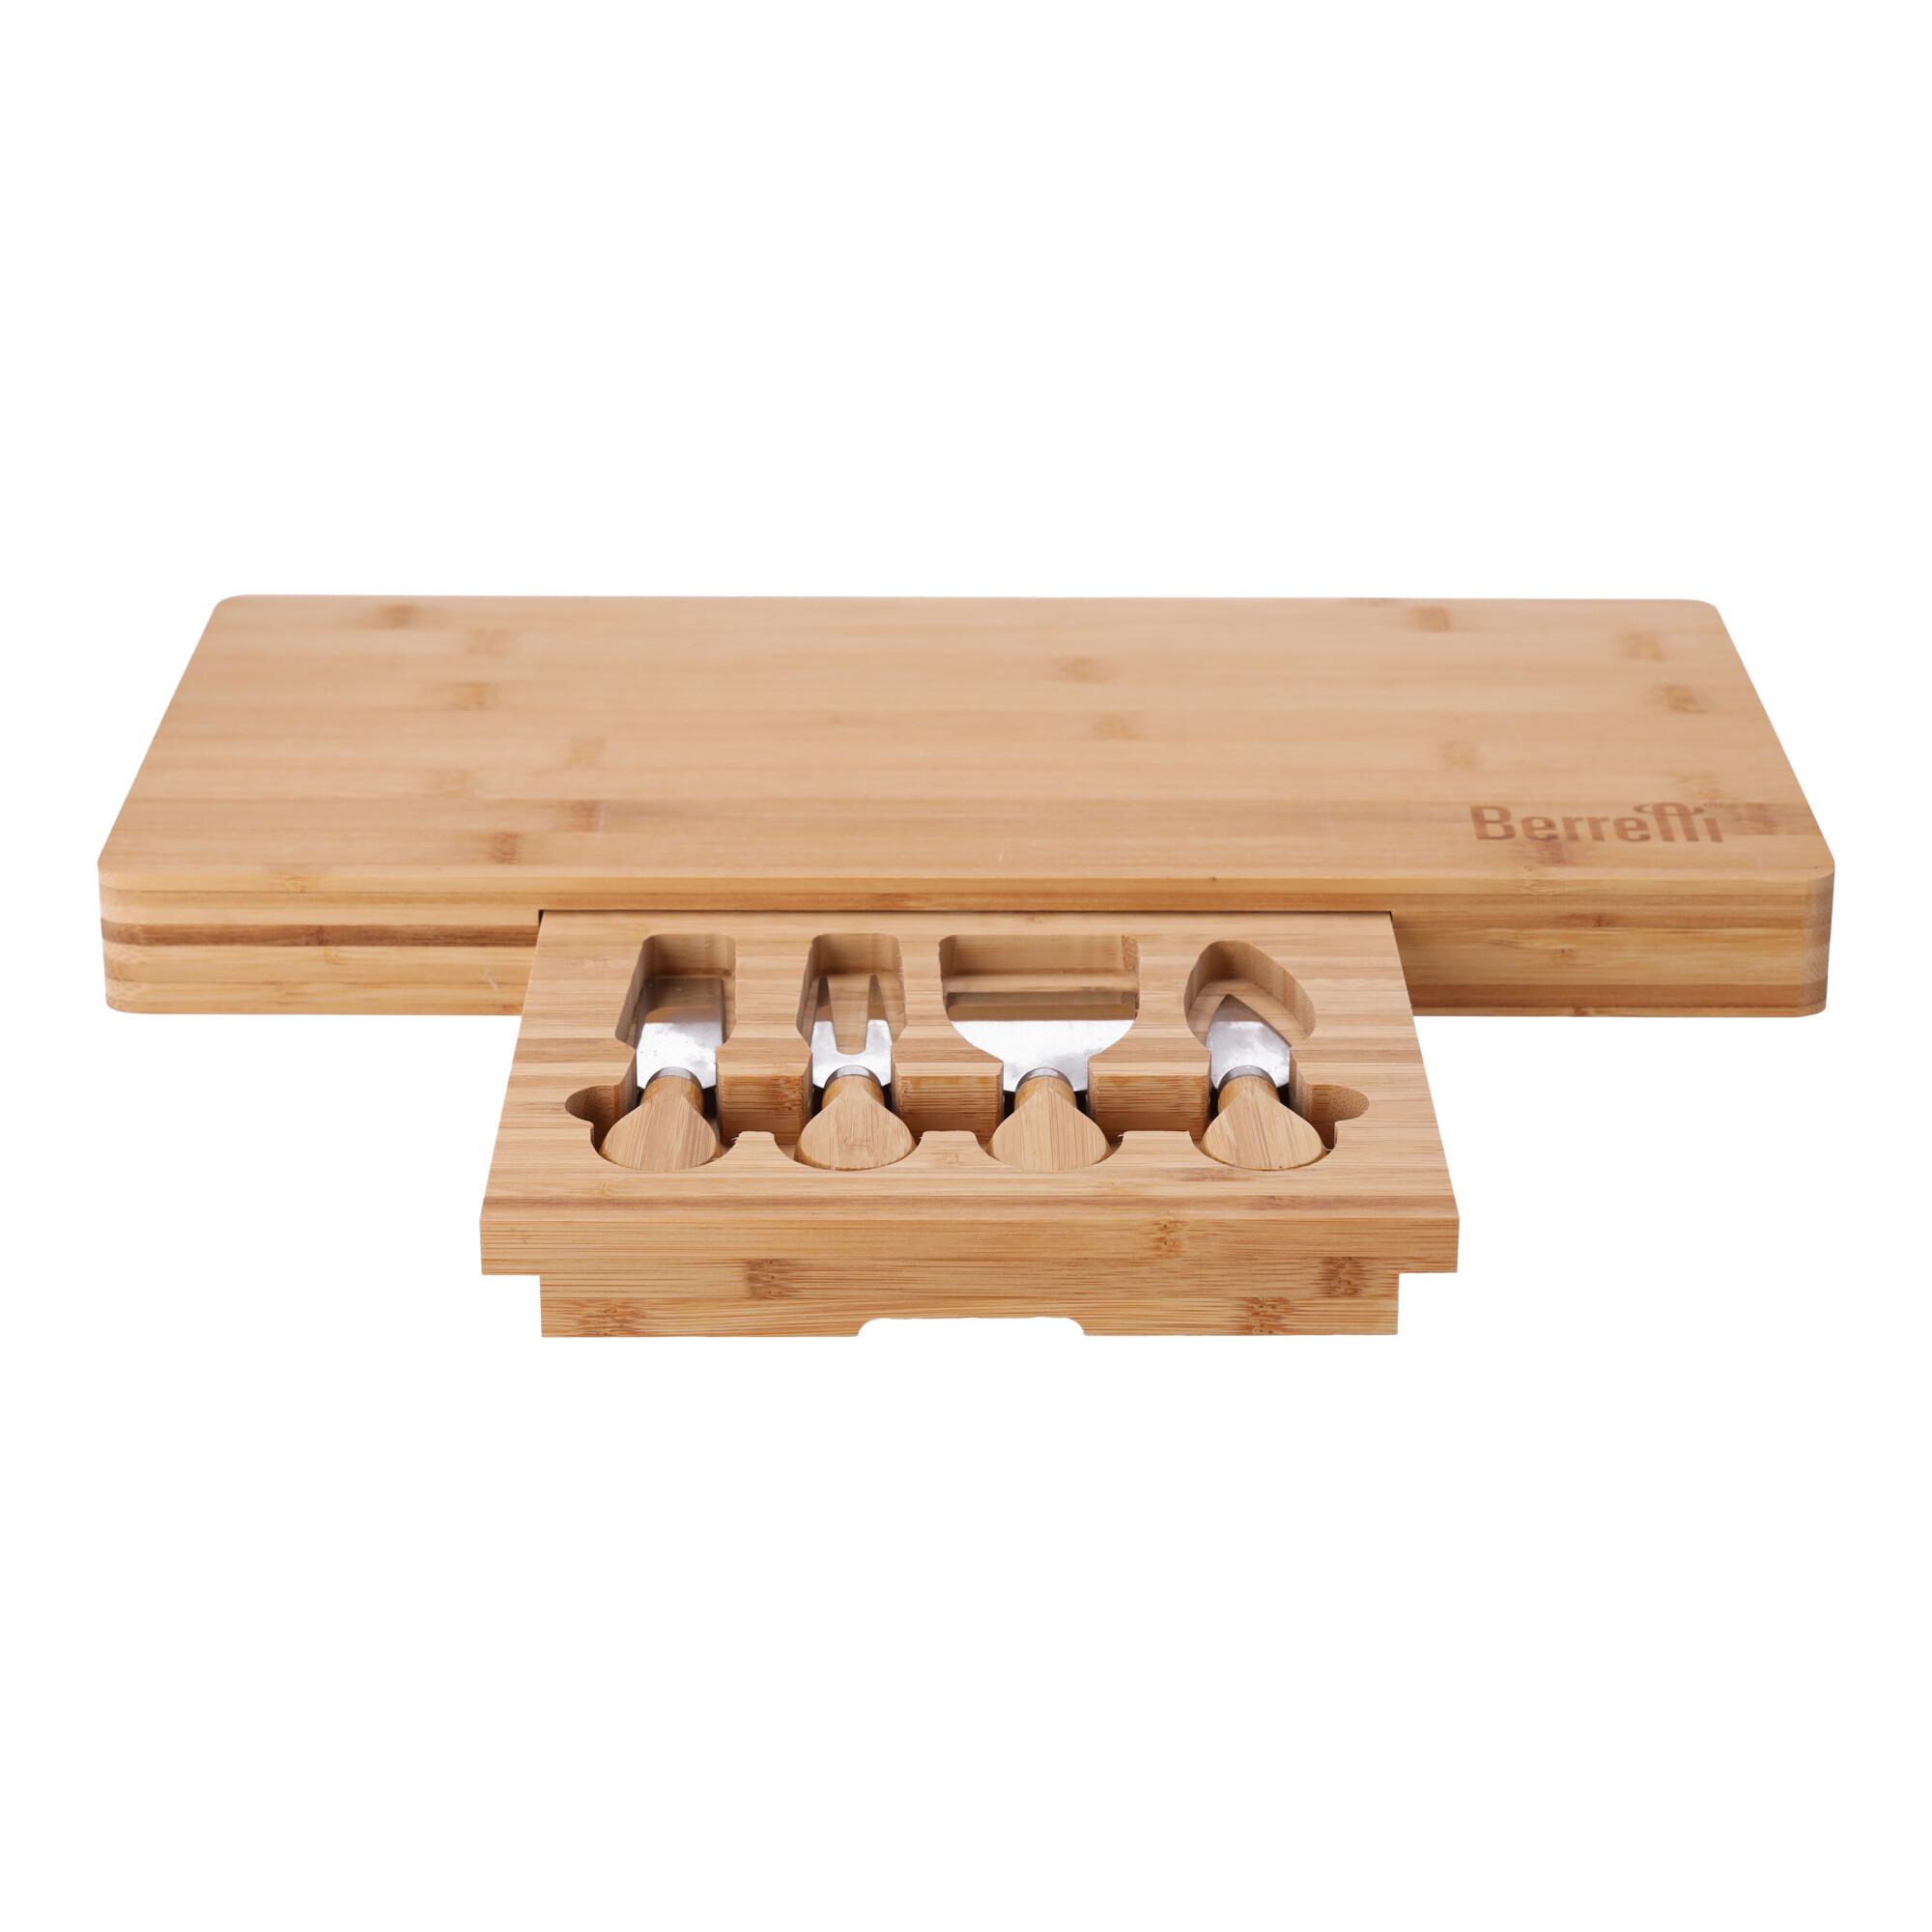 Bamboo cheese serving board with knives BERRETTI, size 45.5x22x4 cm.